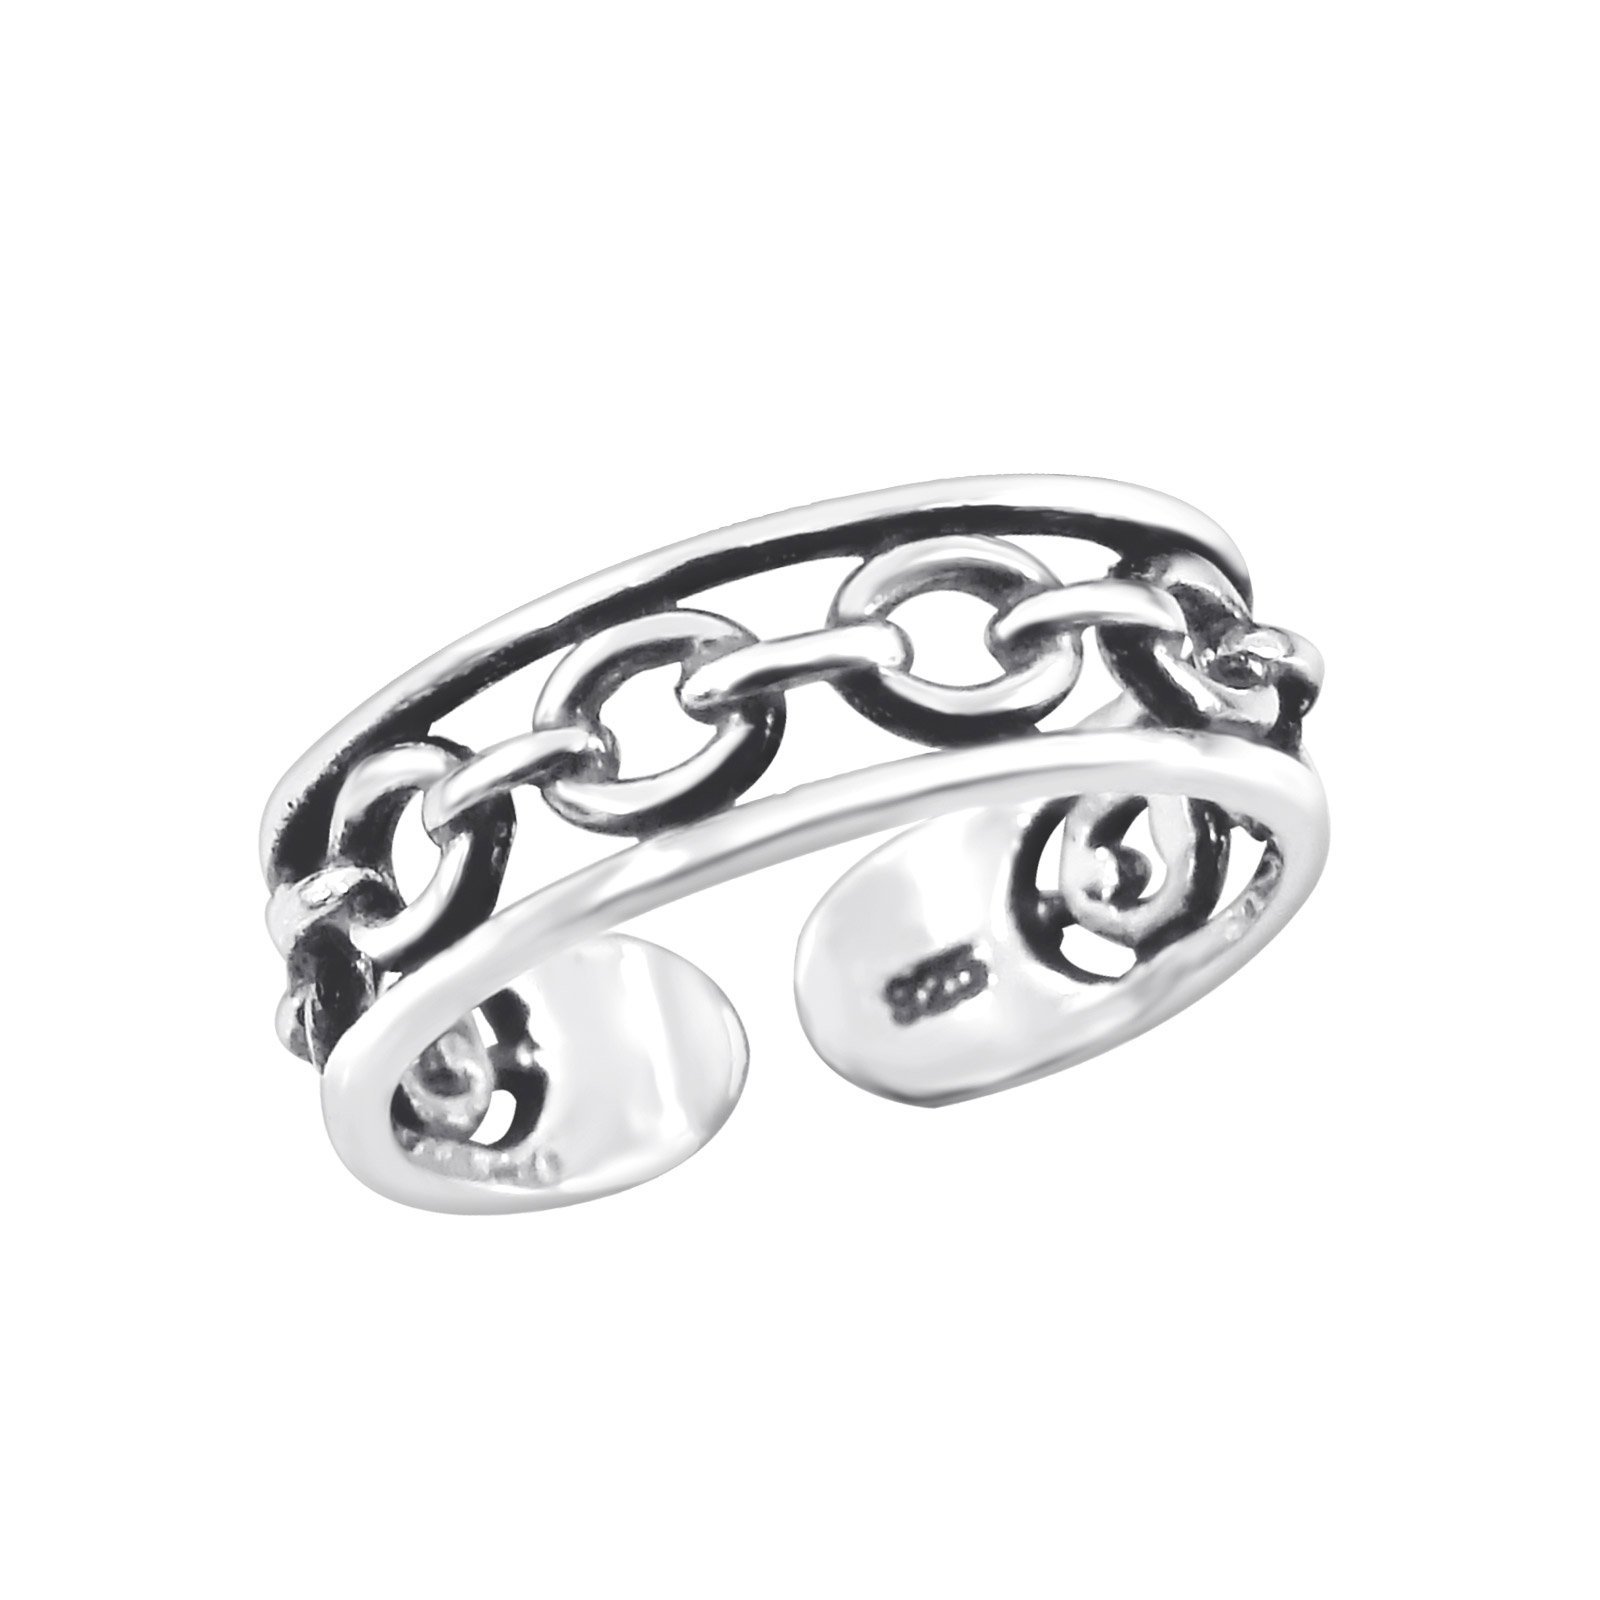 Primary image for 925 Sterling Silver Adjustable Toe Ring